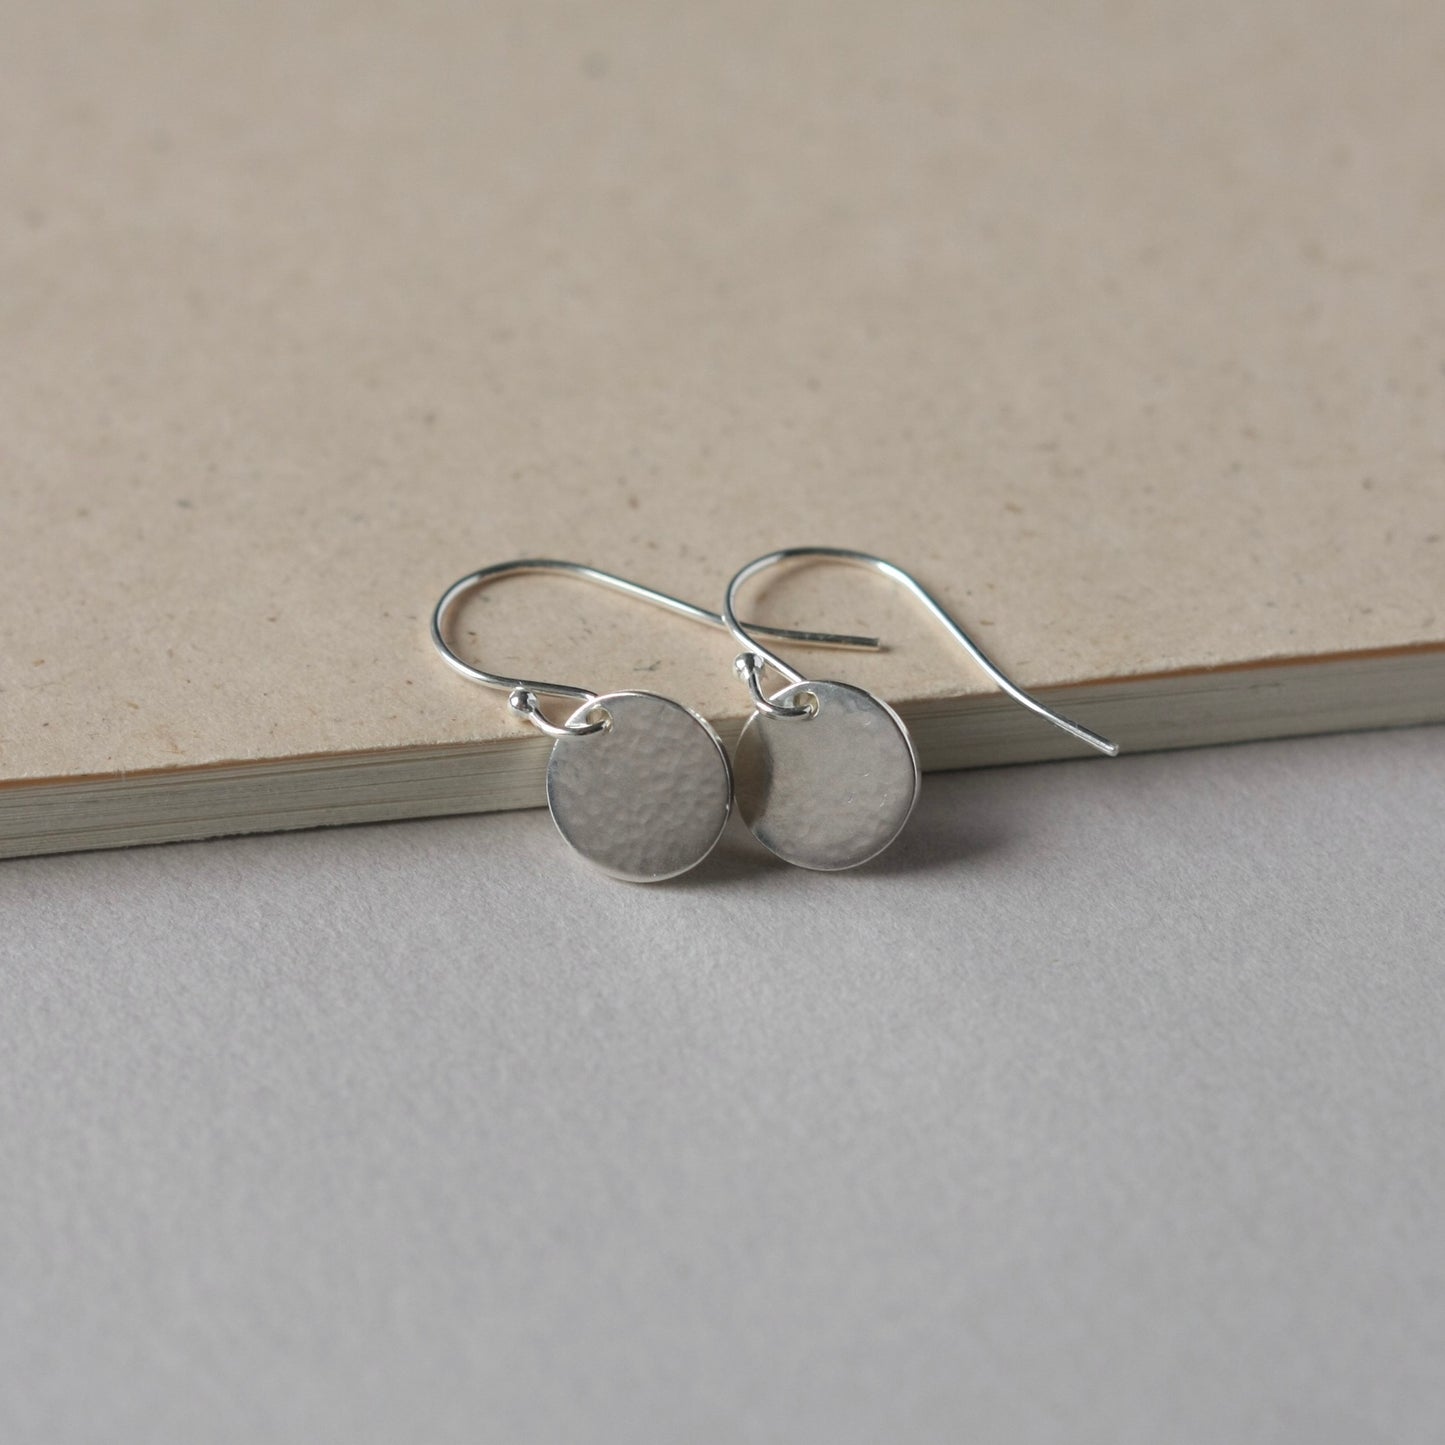 Small Sterling Silver Hammered Disc Earrings